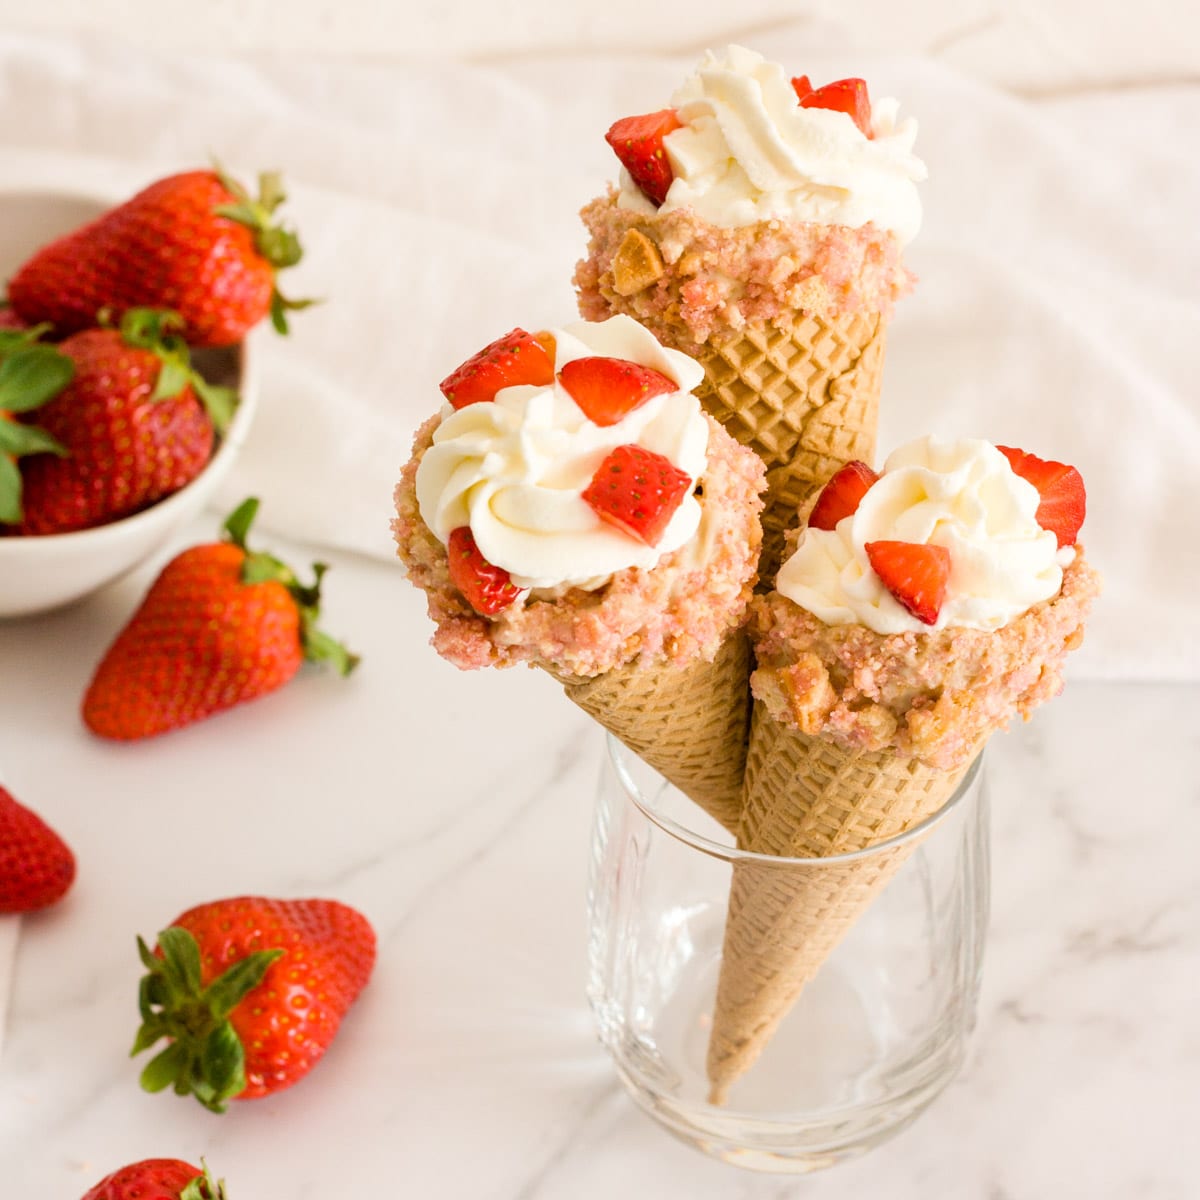 strawberry crunch cheesecake cones in a glass surrounded by strawberries on a white surface